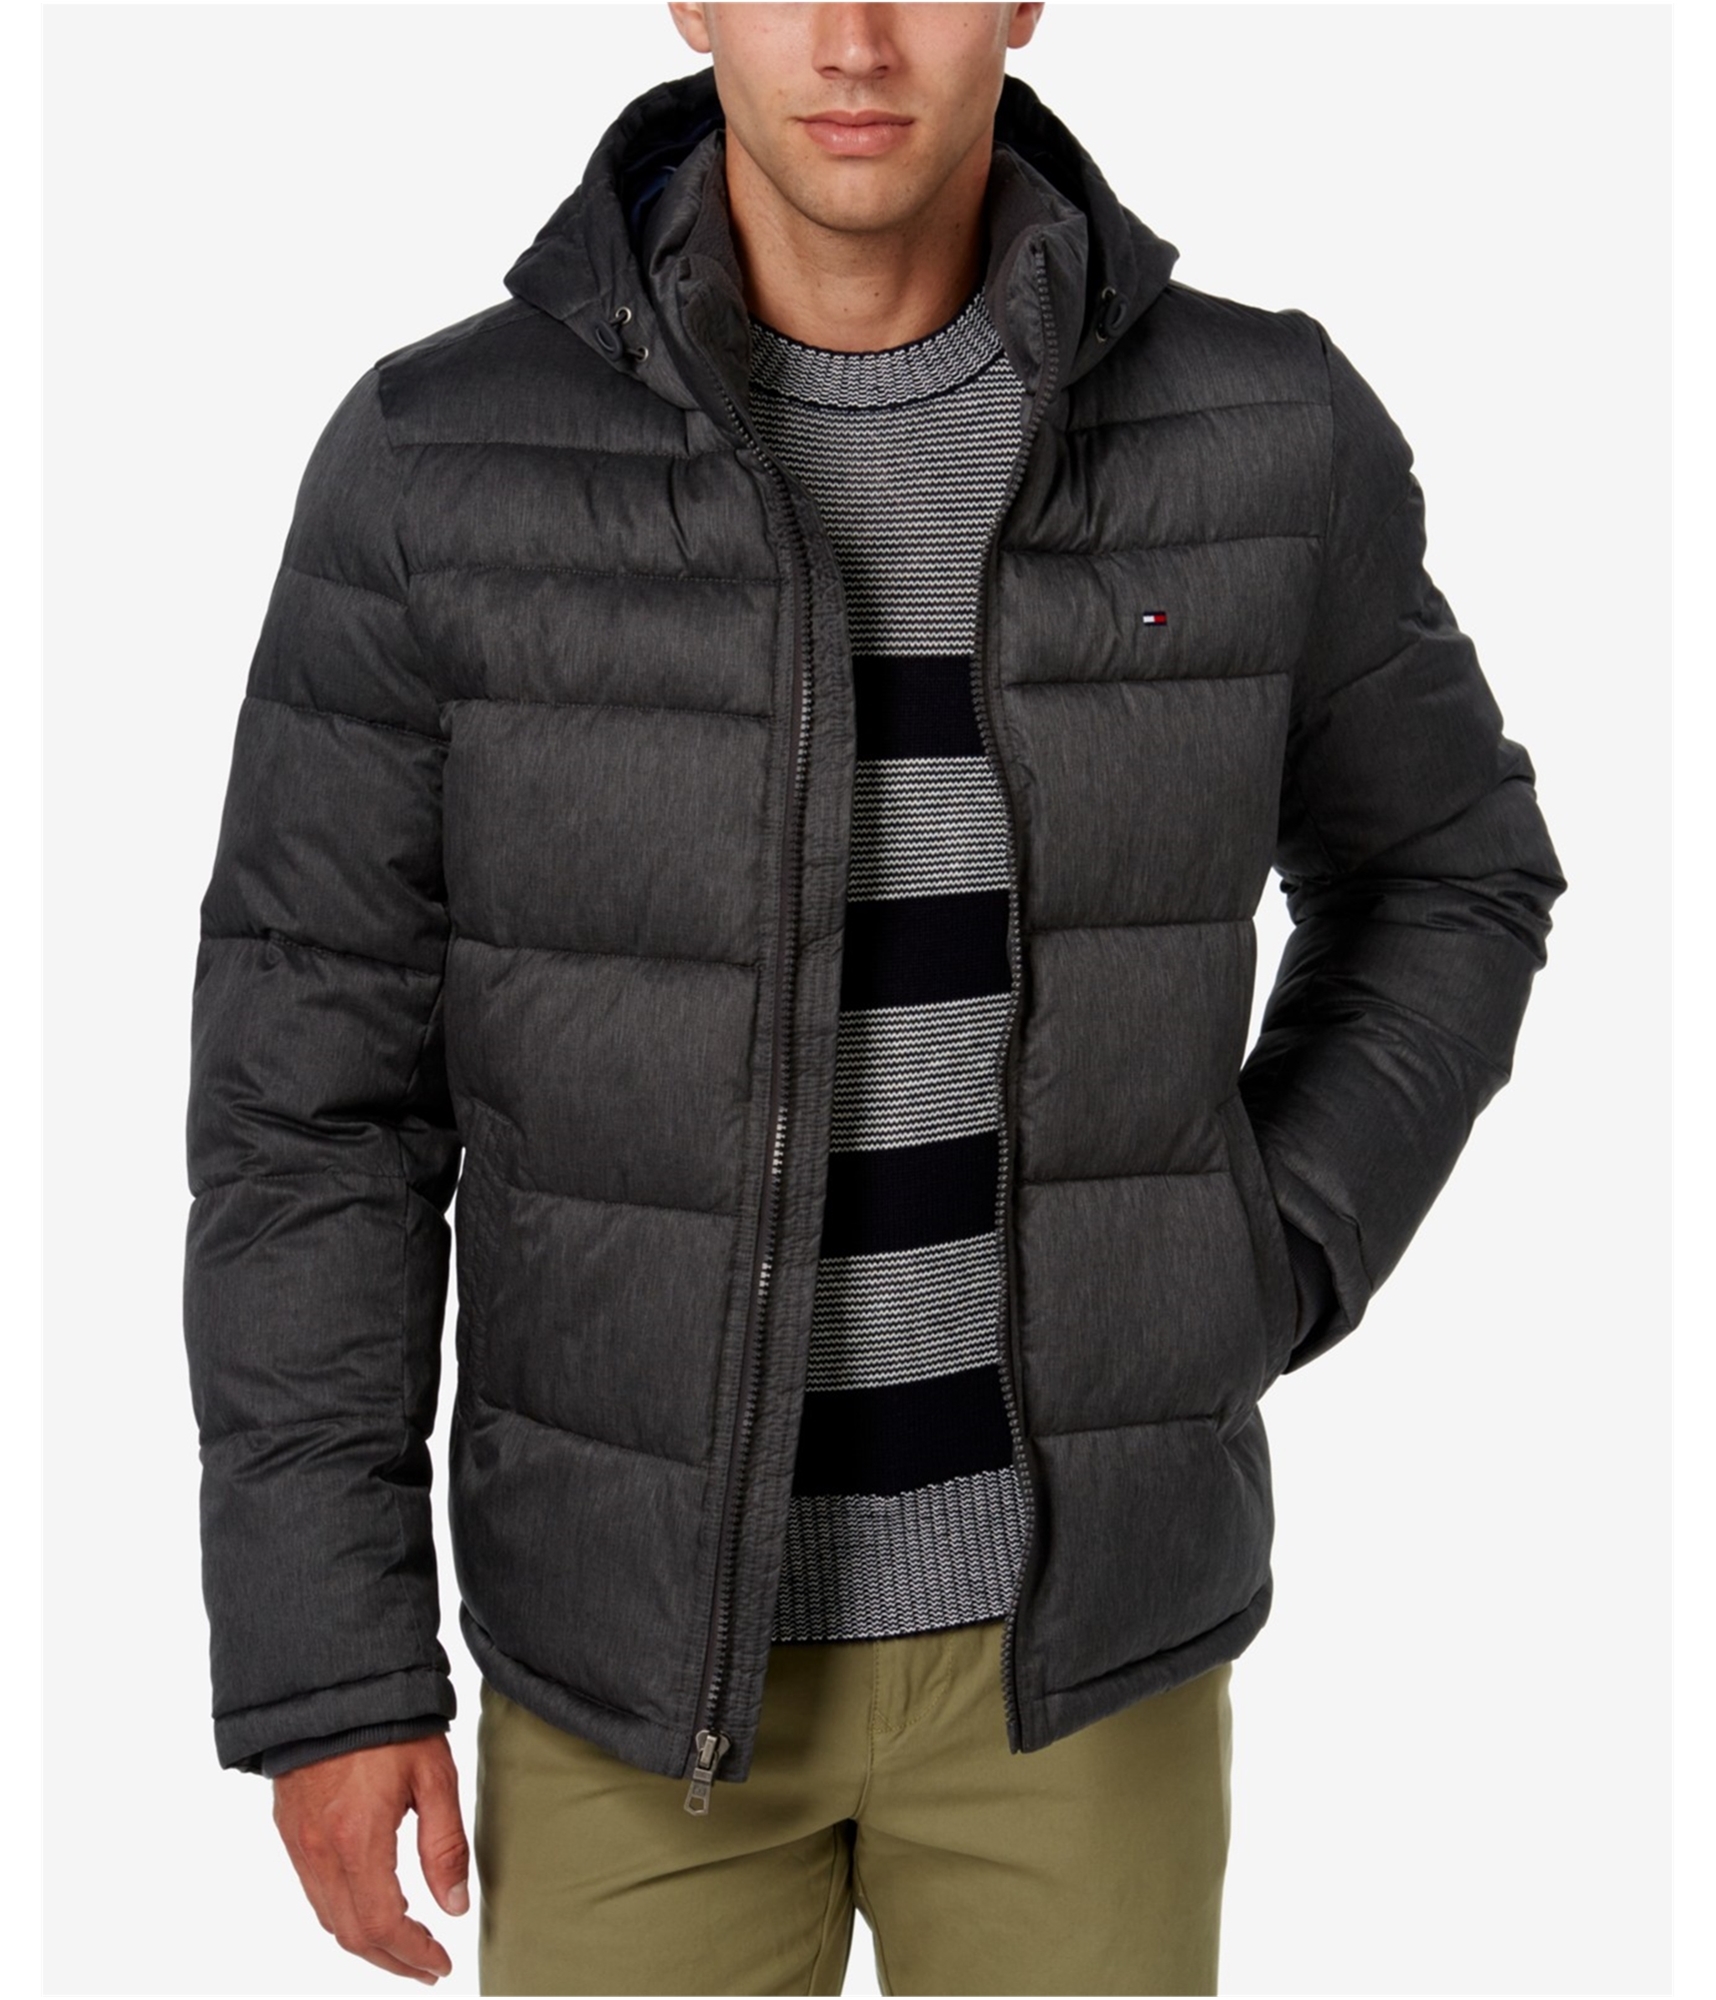 Buy a Mens Tommy Hilfiger Solid Puffer Jacket Online | TagsWeekly.com, TW1